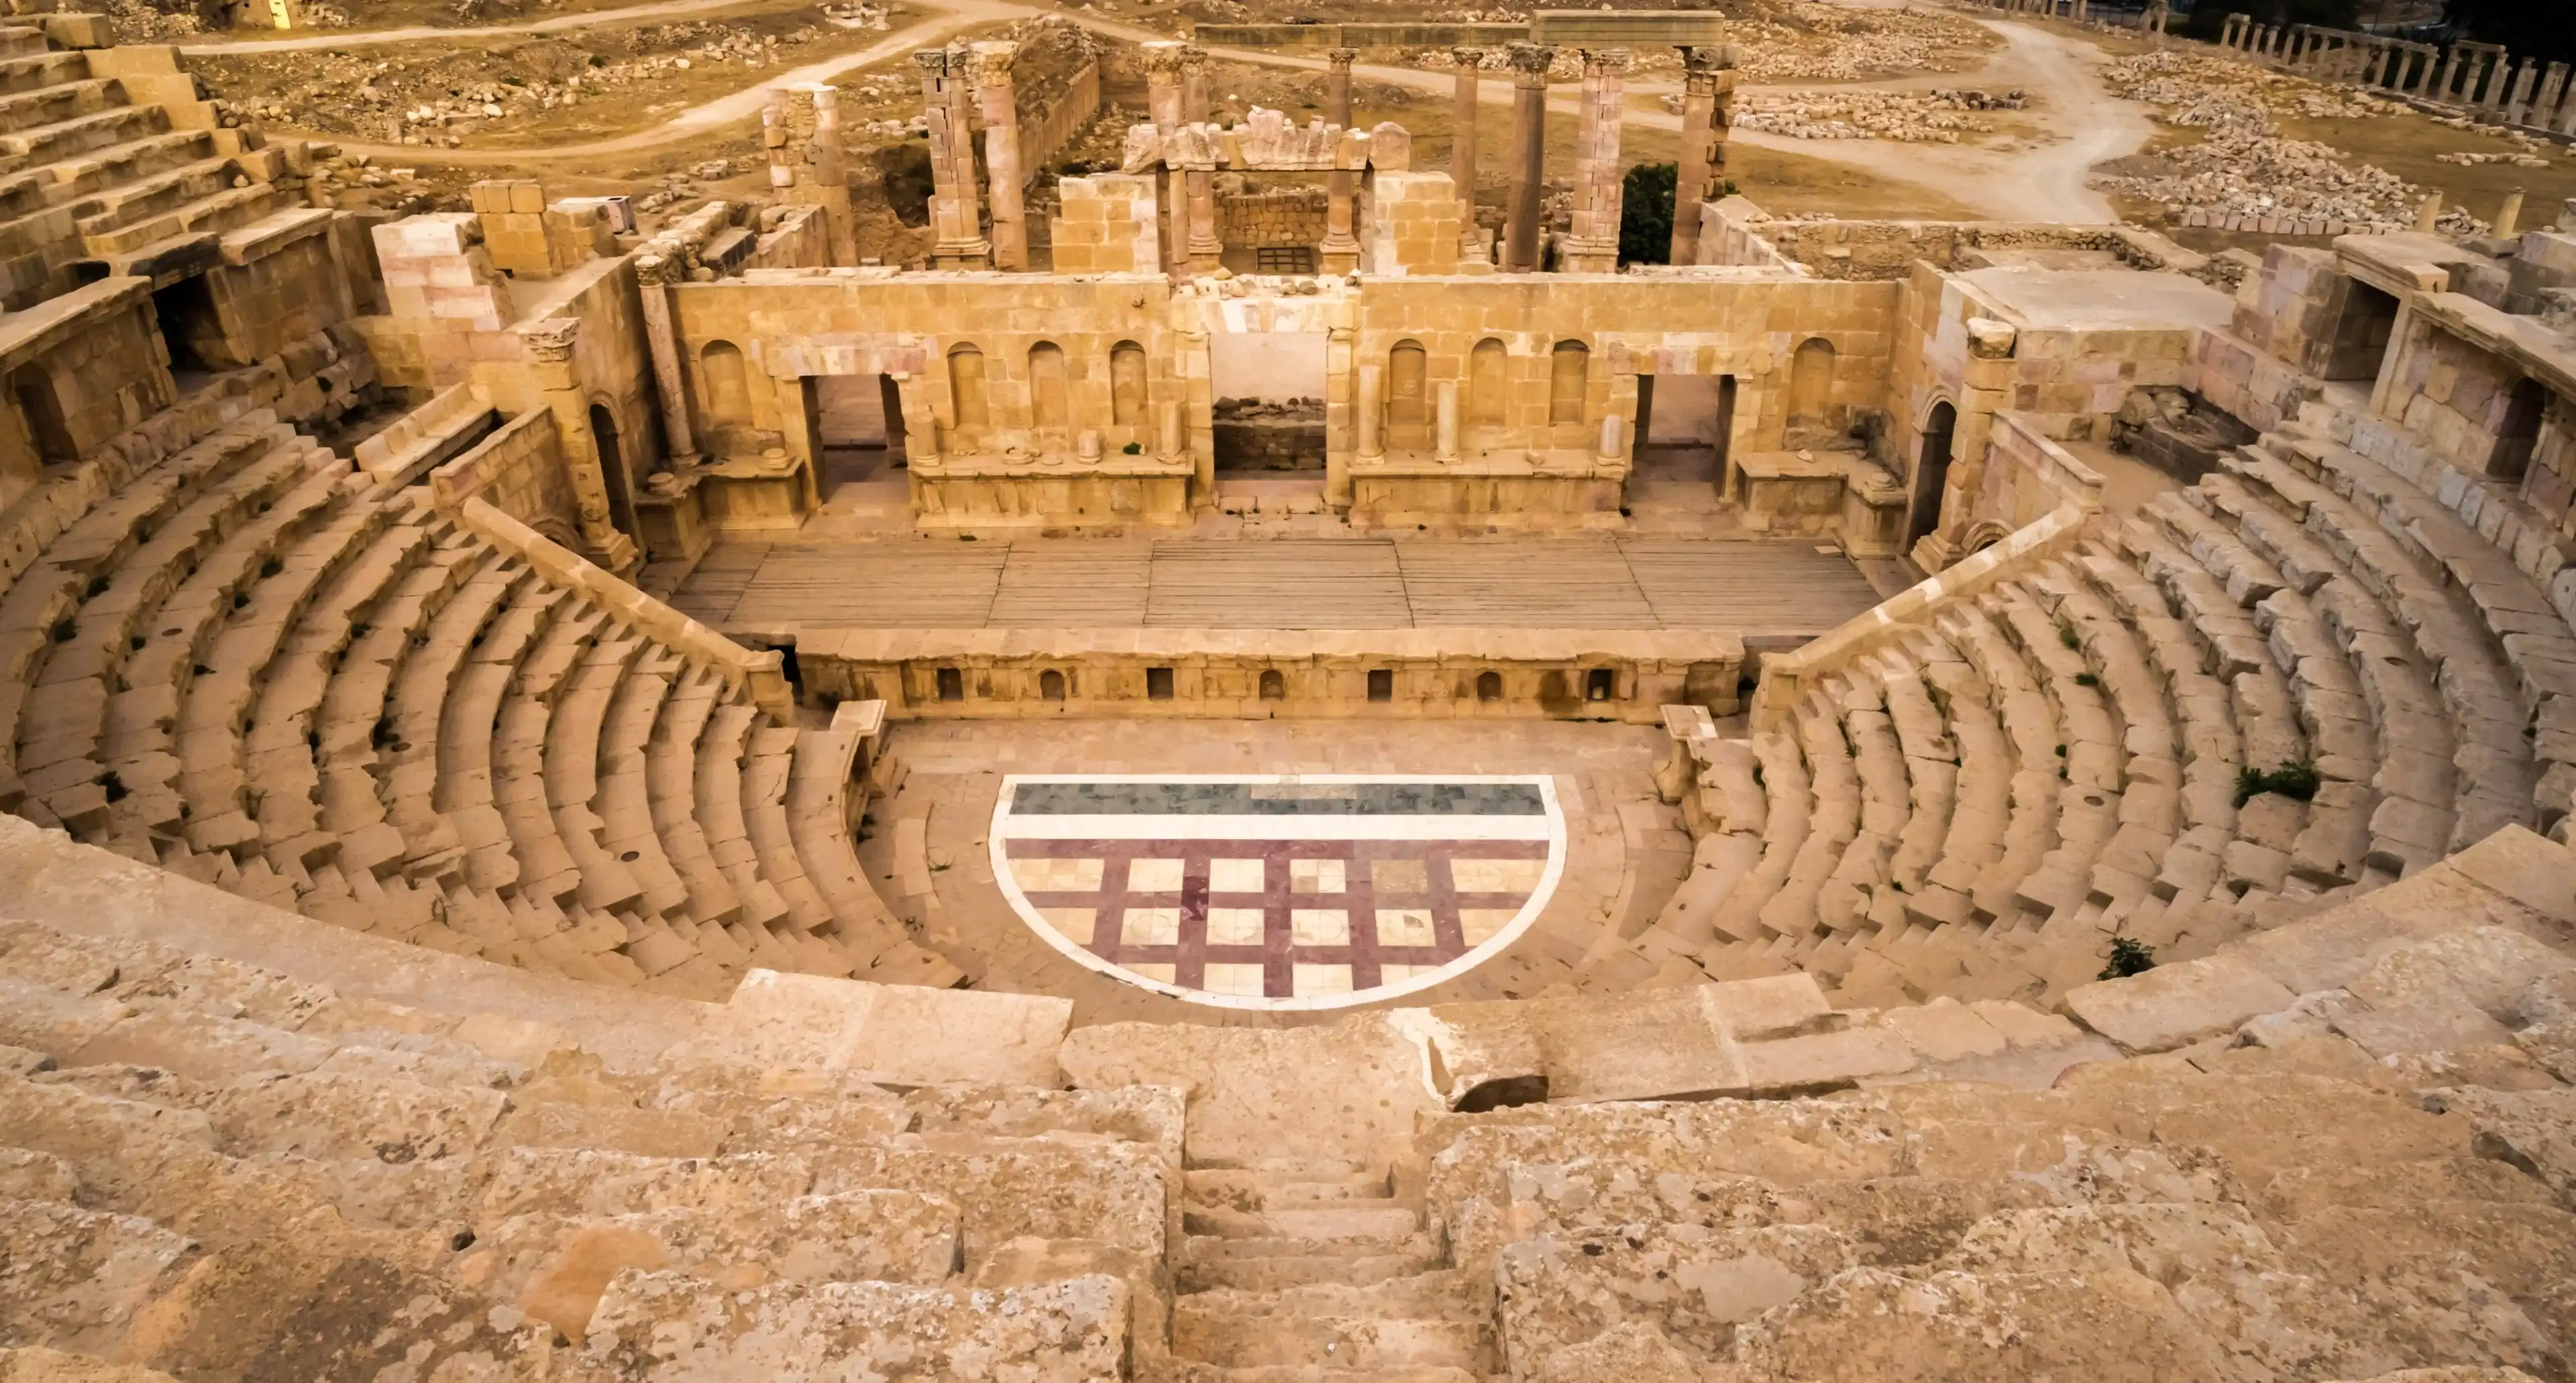 The remainings of an ancient amphitheater in the ruins of Roman Jerash in todays Jordan